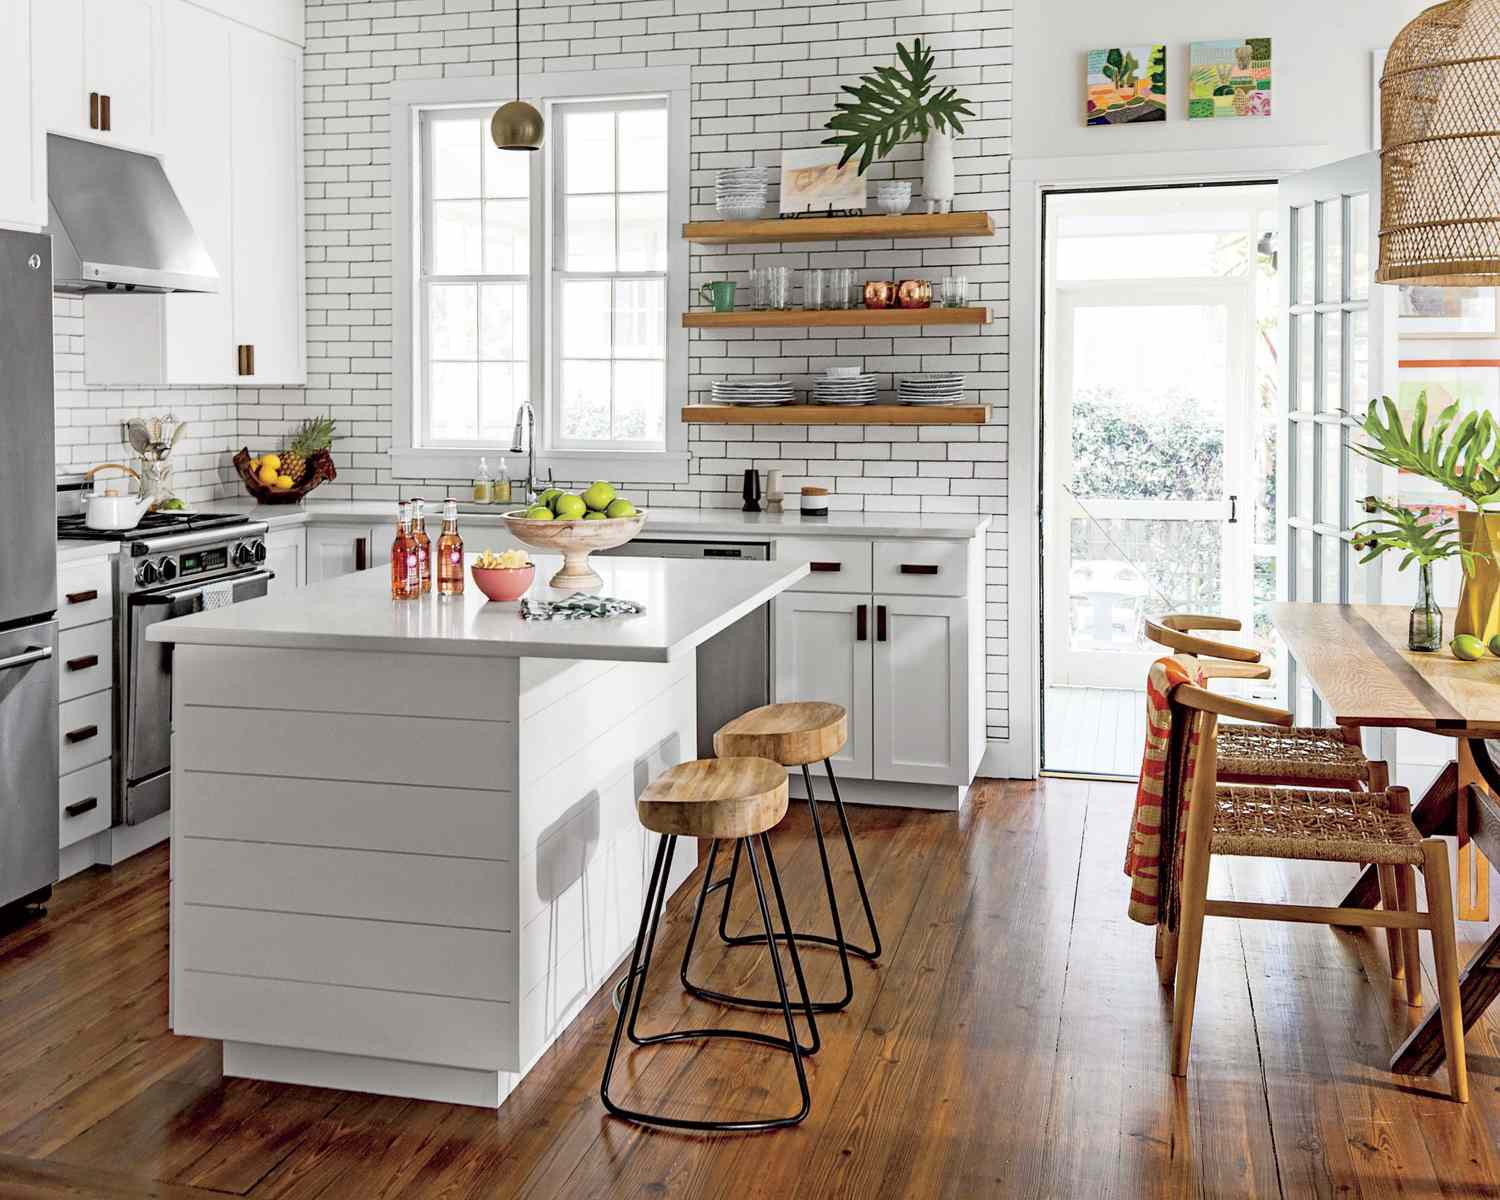 What is the Most Efficient Layout for a Small Kitchen